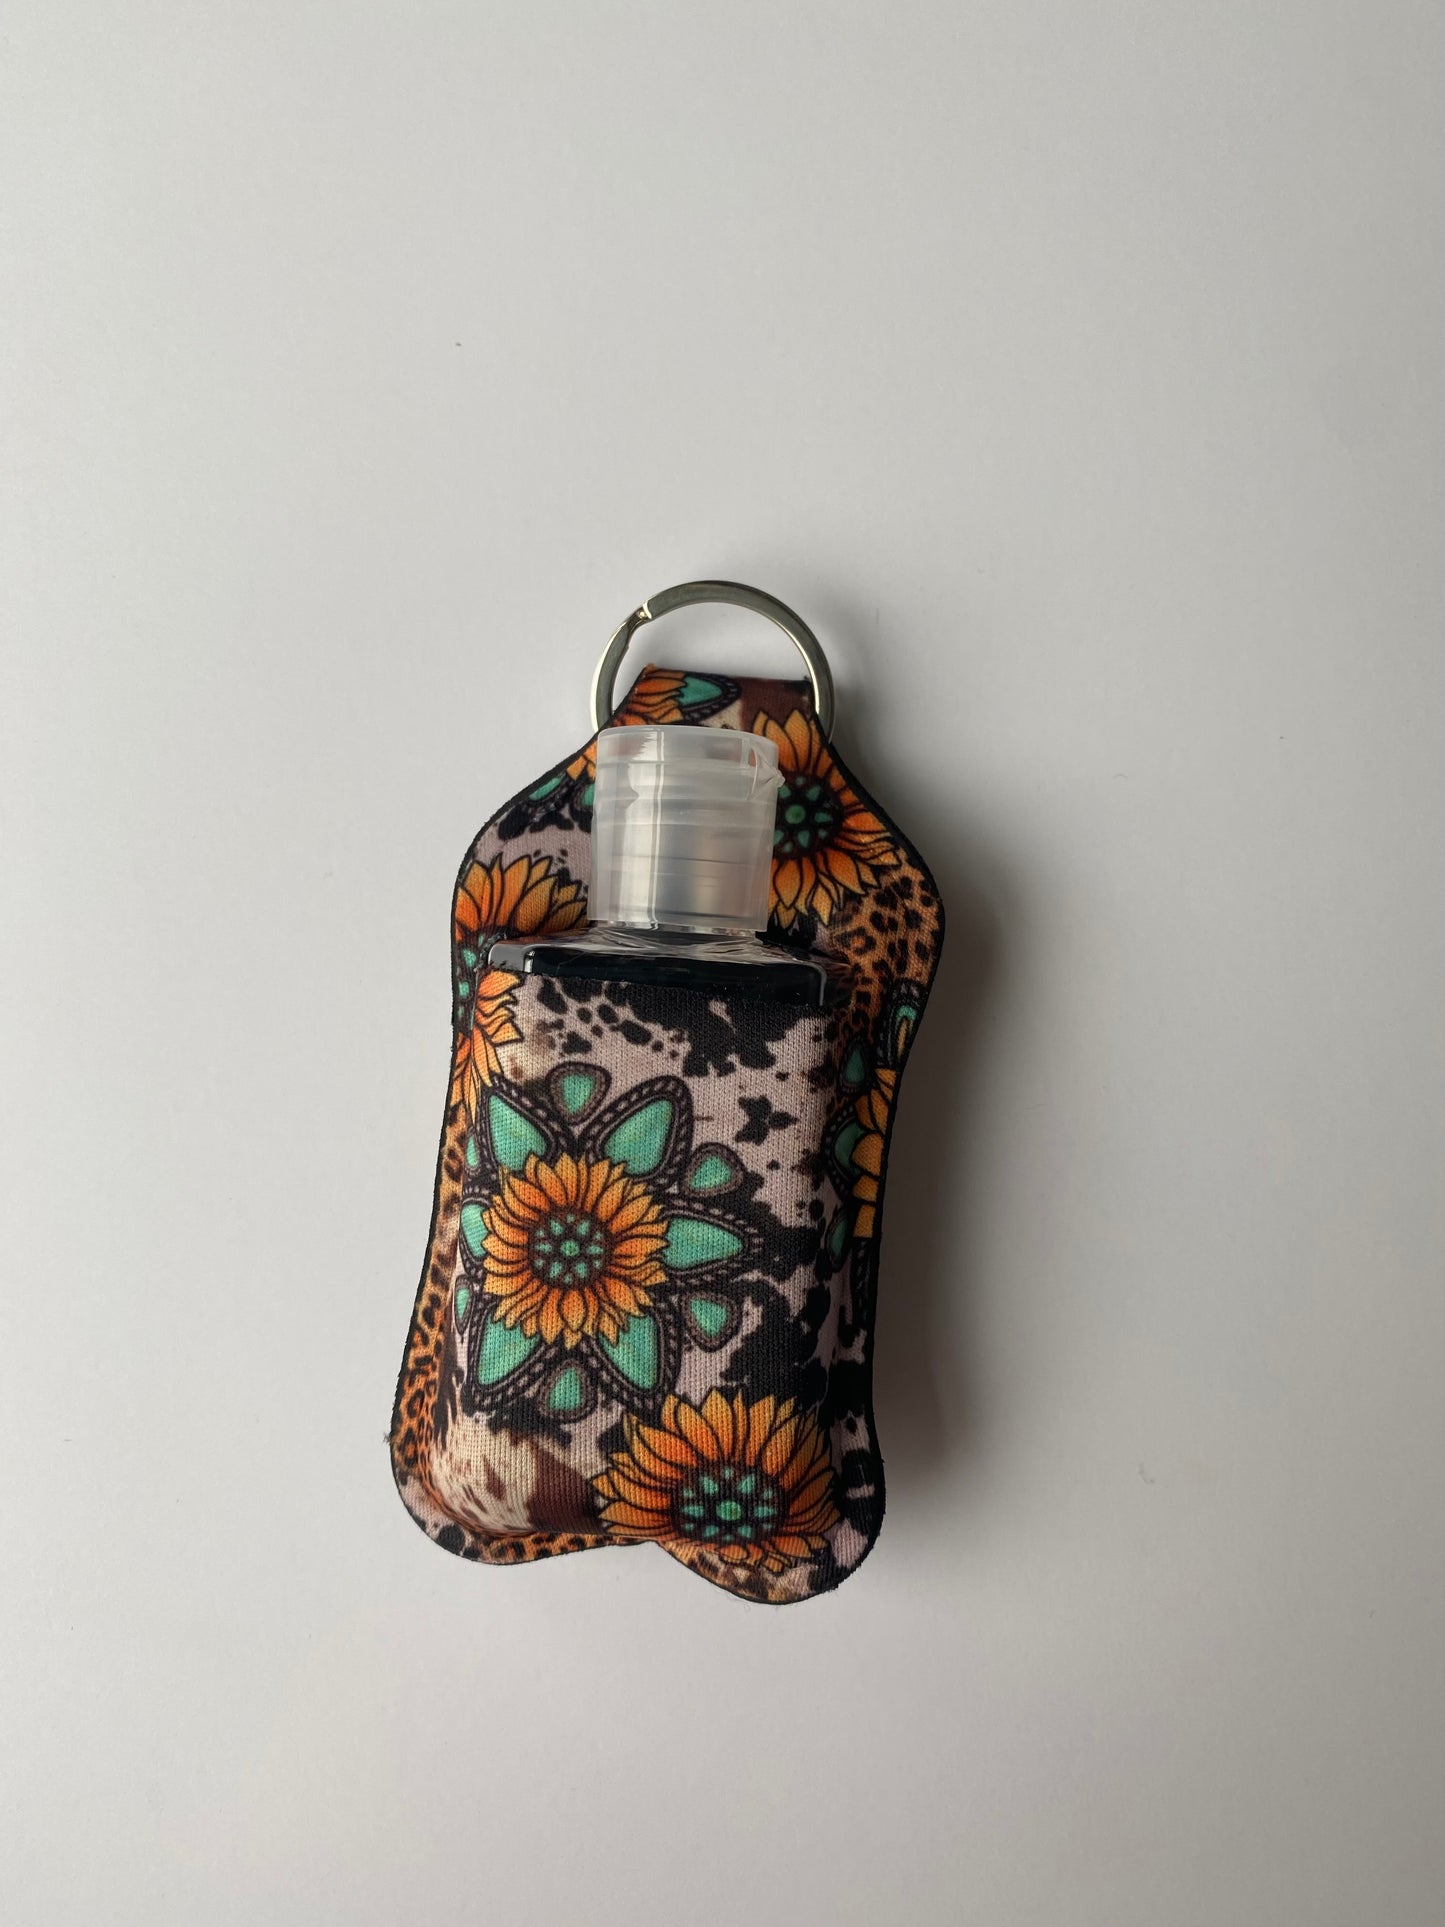 Turquoise Dreams Hand Sanitizer Keychain